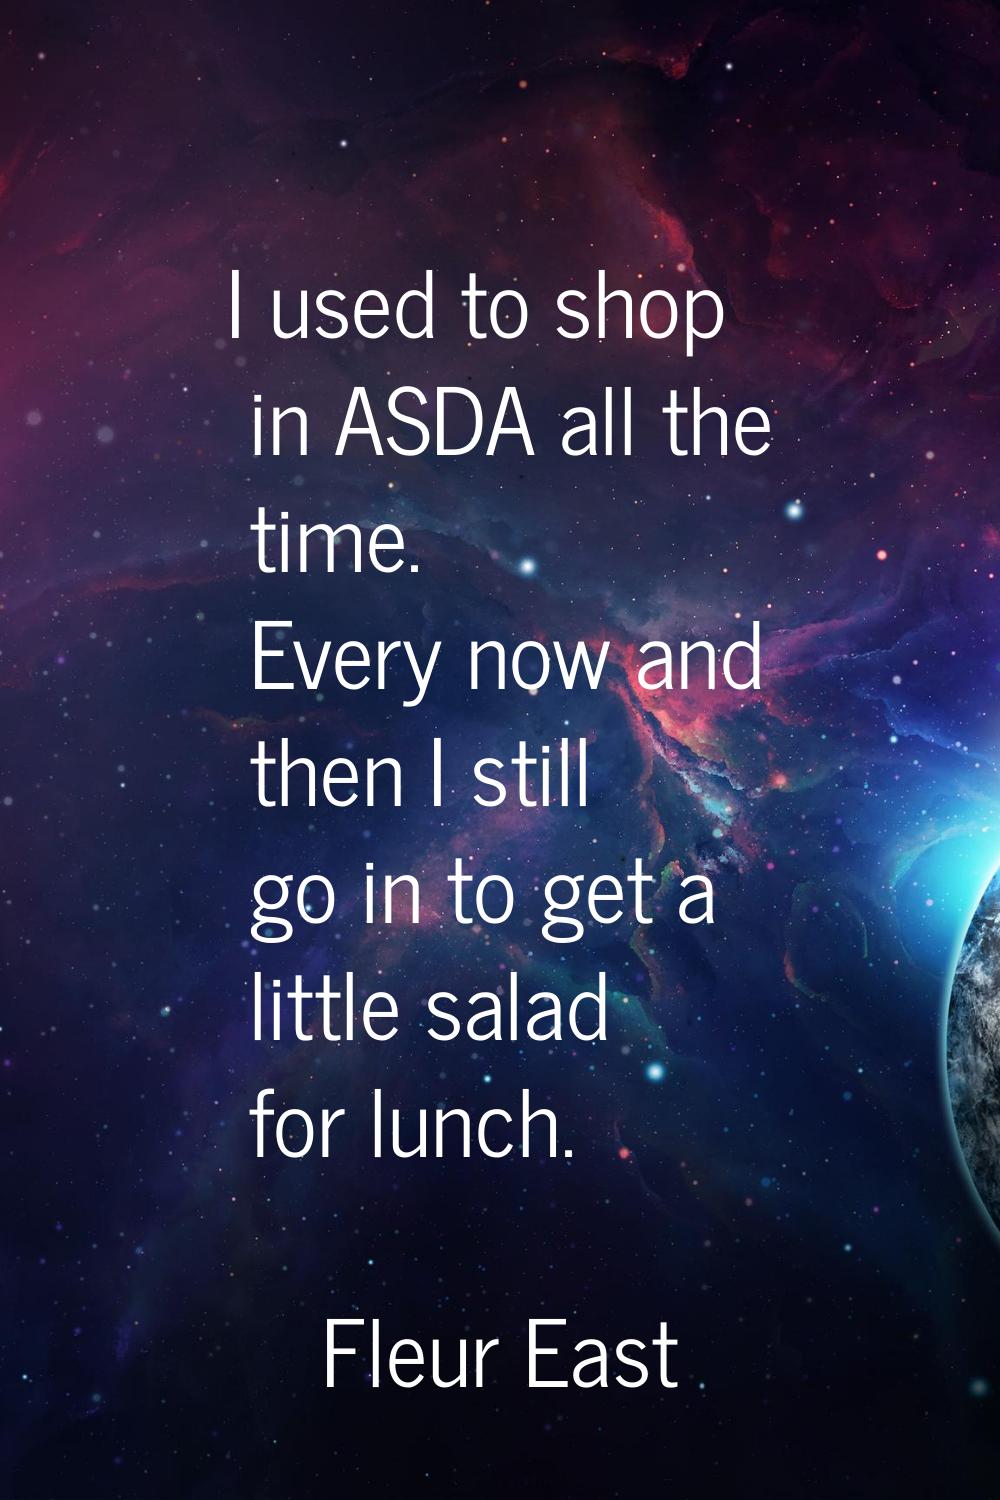 I used to shop in ASDA all the time. Every now and then I still go in to get a little salad for lun